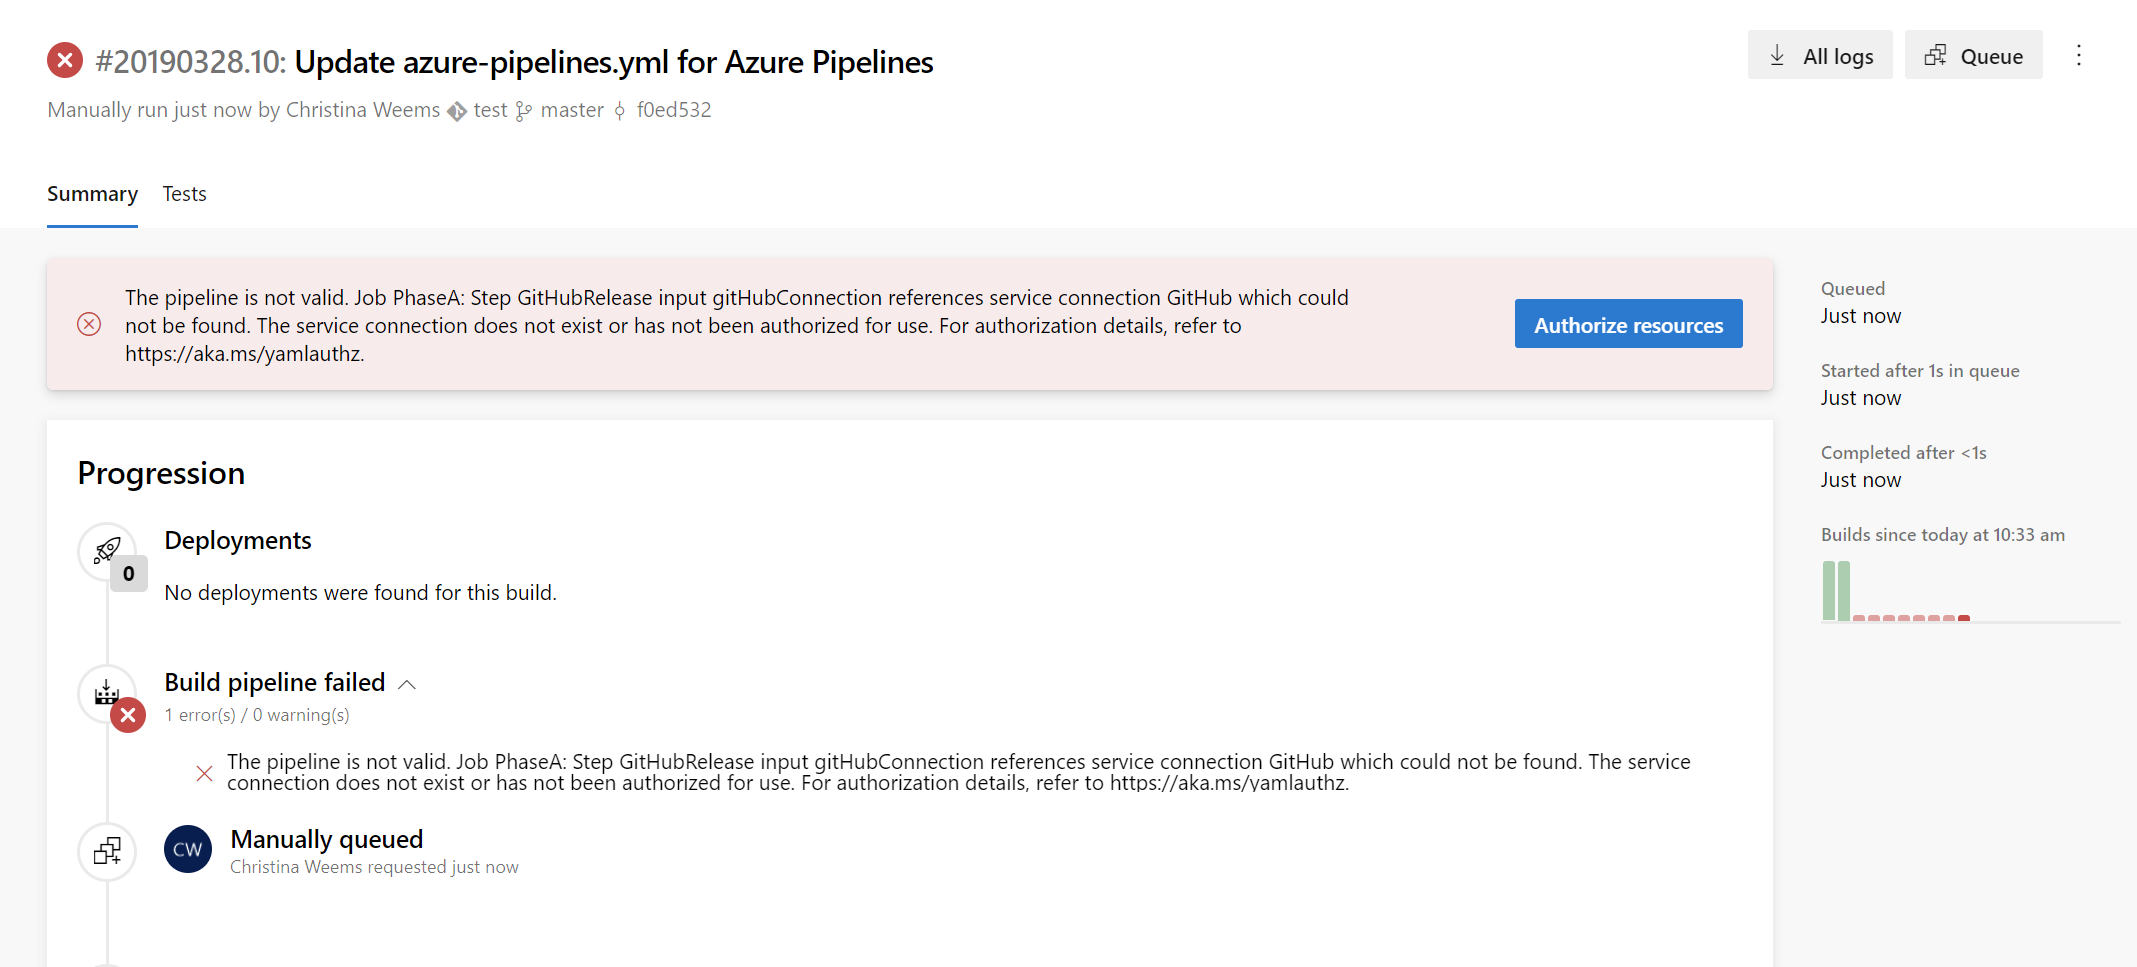 Screenshot showing a pipeline summary with authorization error.